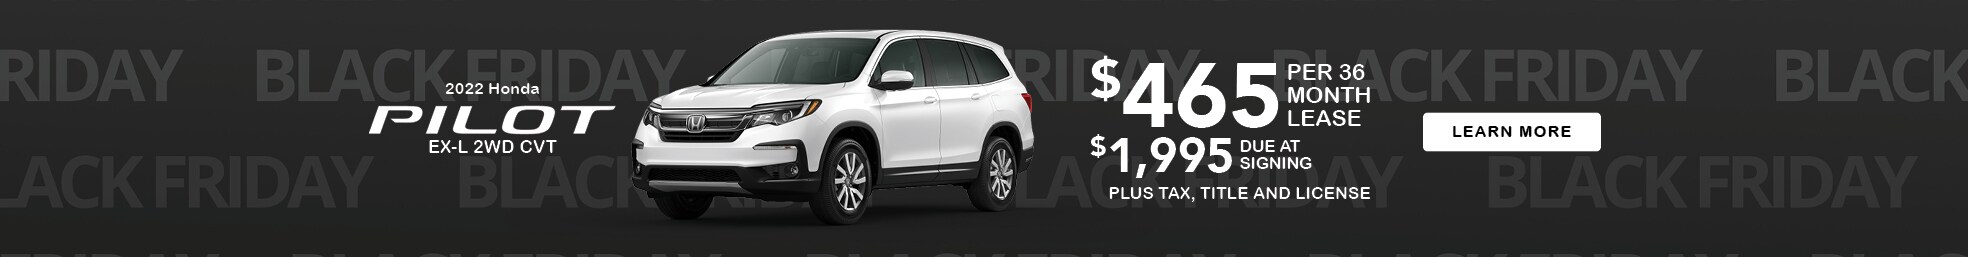 2022 Honda Pilot EXL 2WD CVT $465 per 36 month lease $1995 due at signing plus tax, title, and license